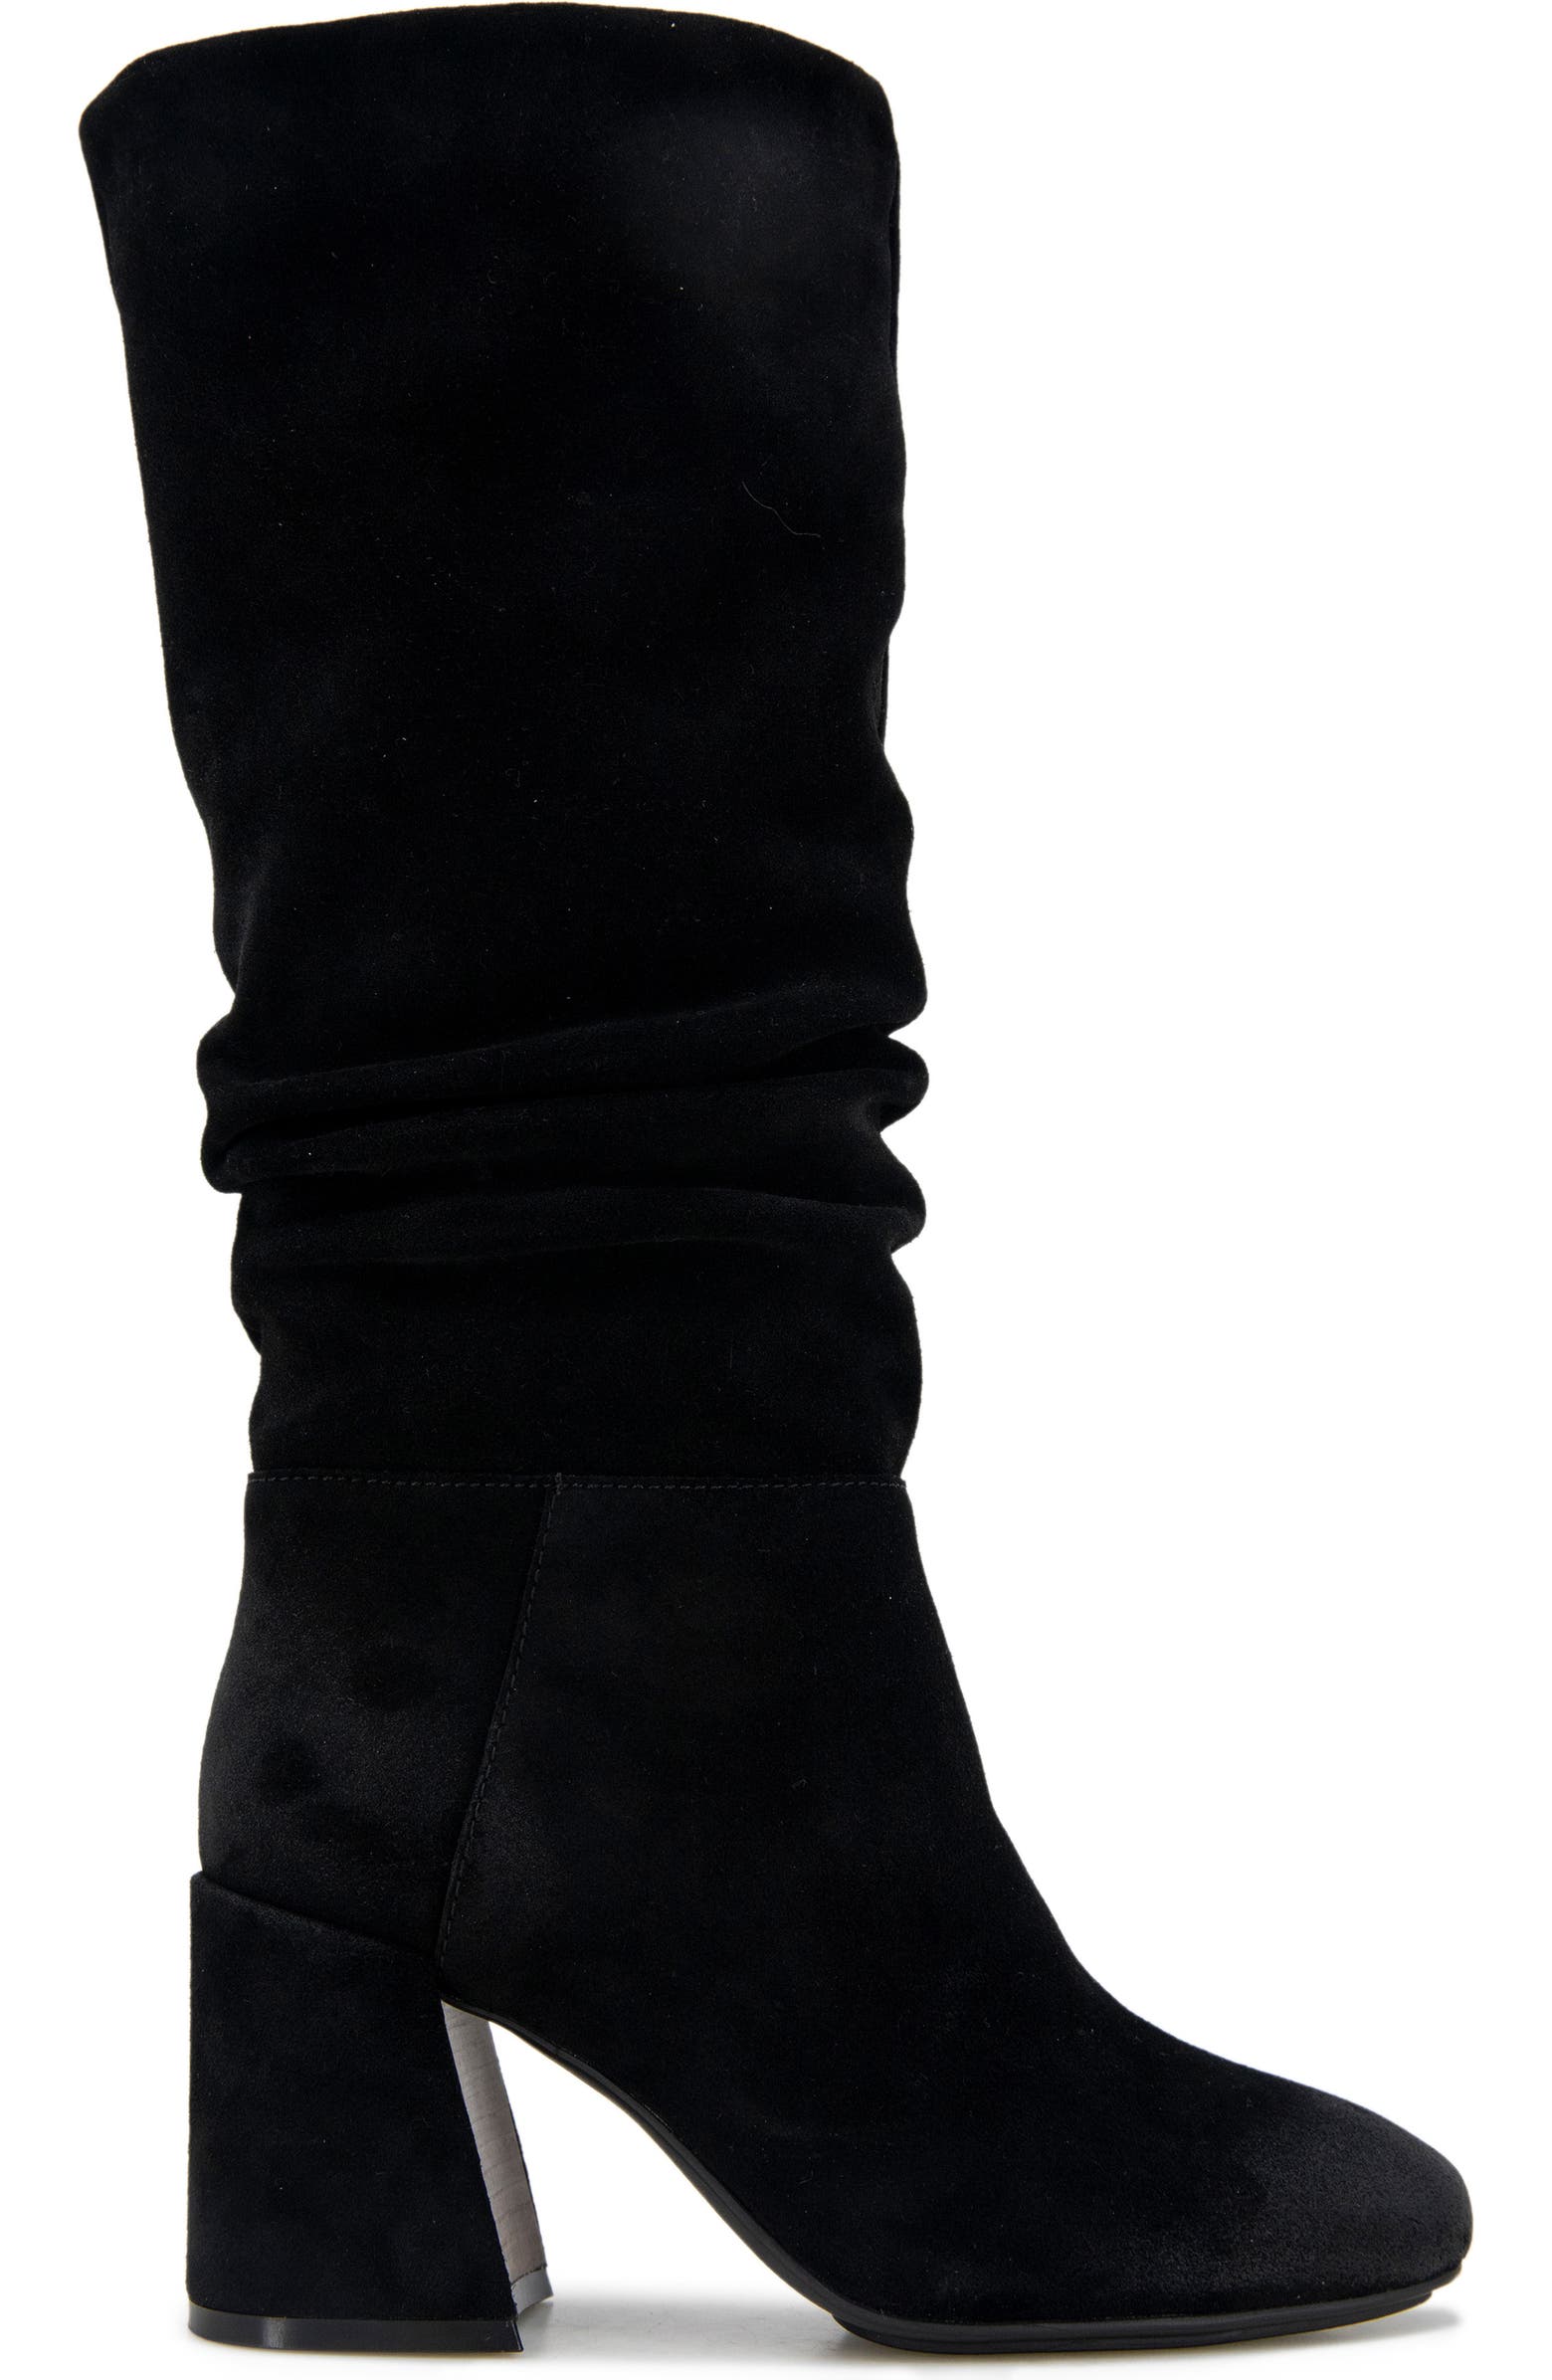 GENTLE SOULS BY KENNETH COLE Iman Slouch Boot (Women) | Nordstrom